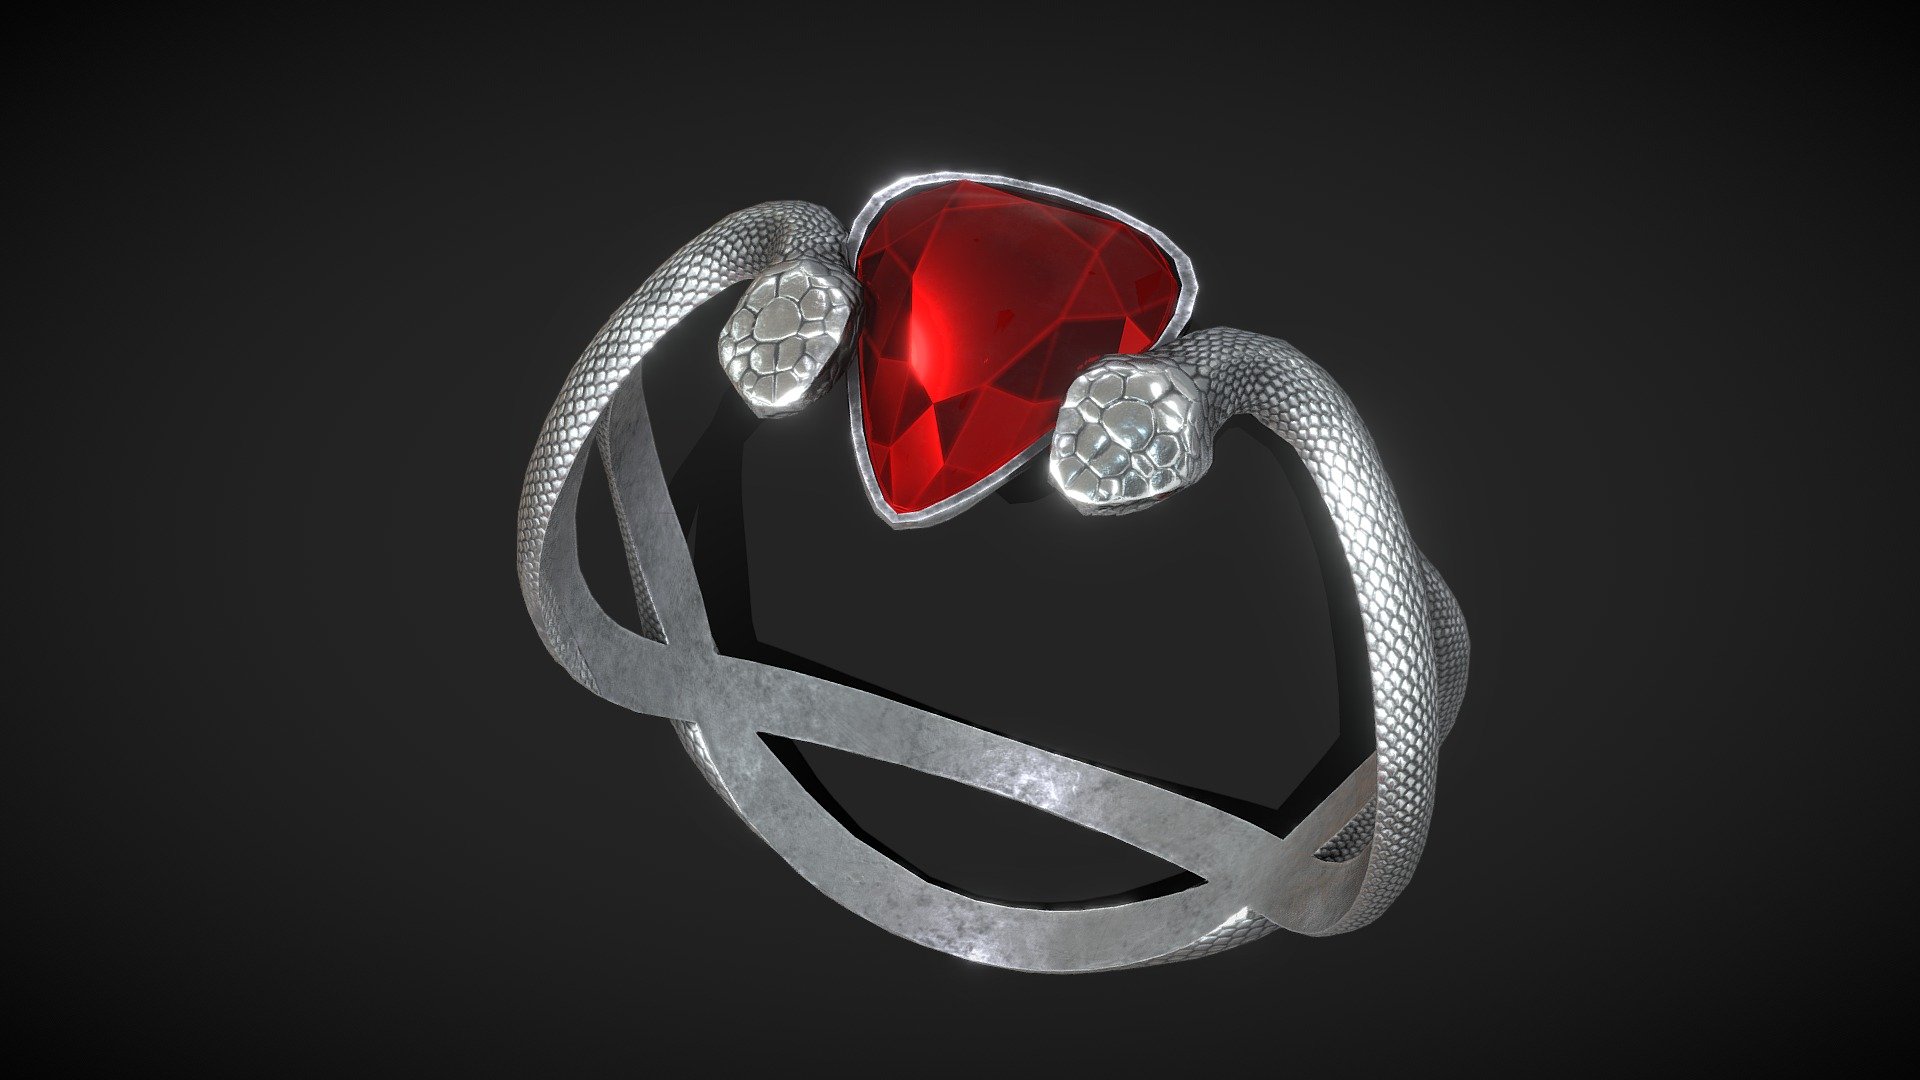 Silver Snake Ring - low poly

Triangles: 3.3k
Vertices: 1.7k

4096x4096 PNG texture

Bonus: The high-poly version of the model is in the additional file. The high poly model don't have a UV map

*Commercial use
**
My models cannot be included in an asset pack or sold at any sort of asset/resource marketplace.* - Silver Snake Ring - low poly - Buy Royalty Free 3D model by Karolina Renkiewicz (@KarolinaRenkiewicz) 3d model